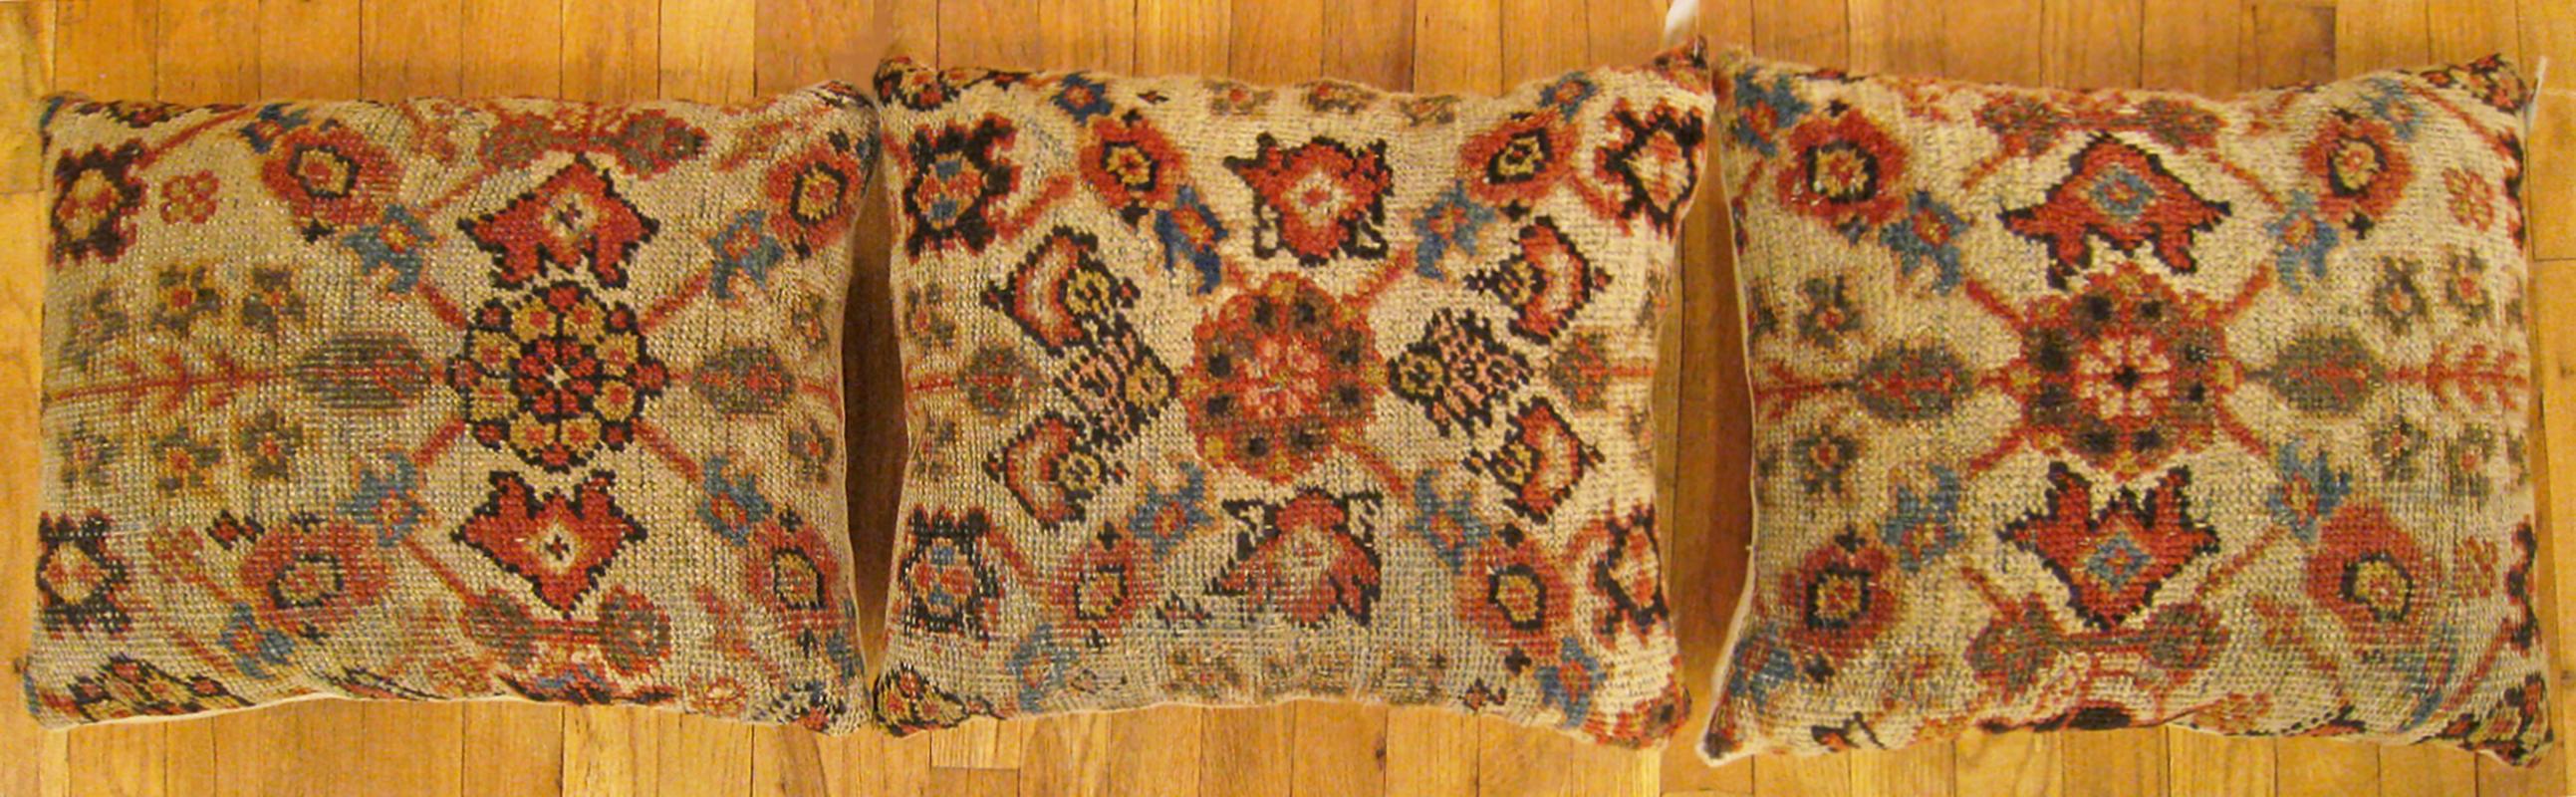 A set of antique Persian sultanabad pillows ; size 1'8” x 1'4” and 1'8